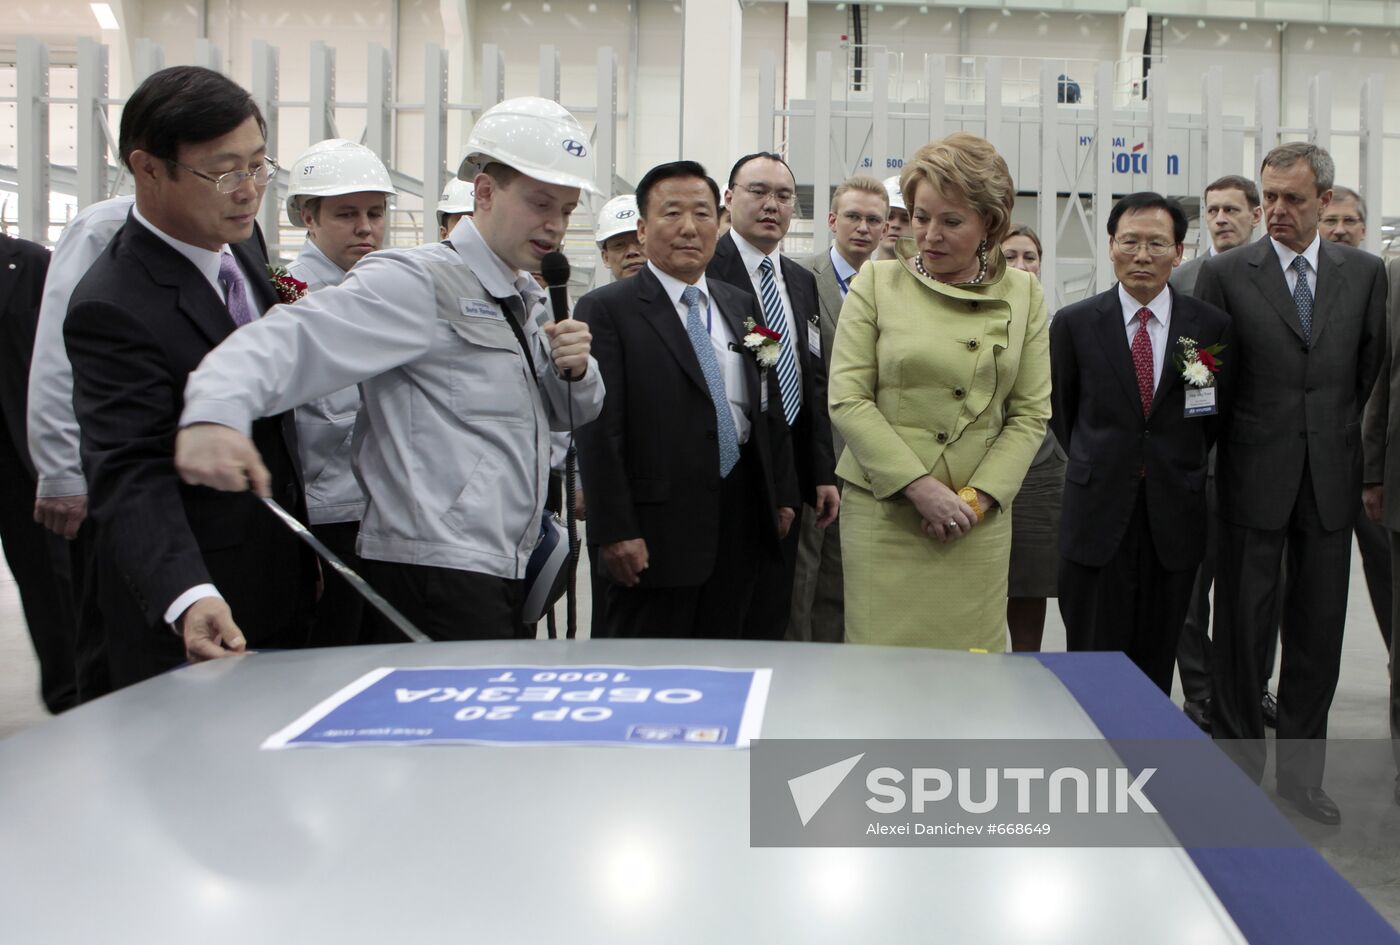 Test operation of stamping line of Hyundai in St. Petersburg